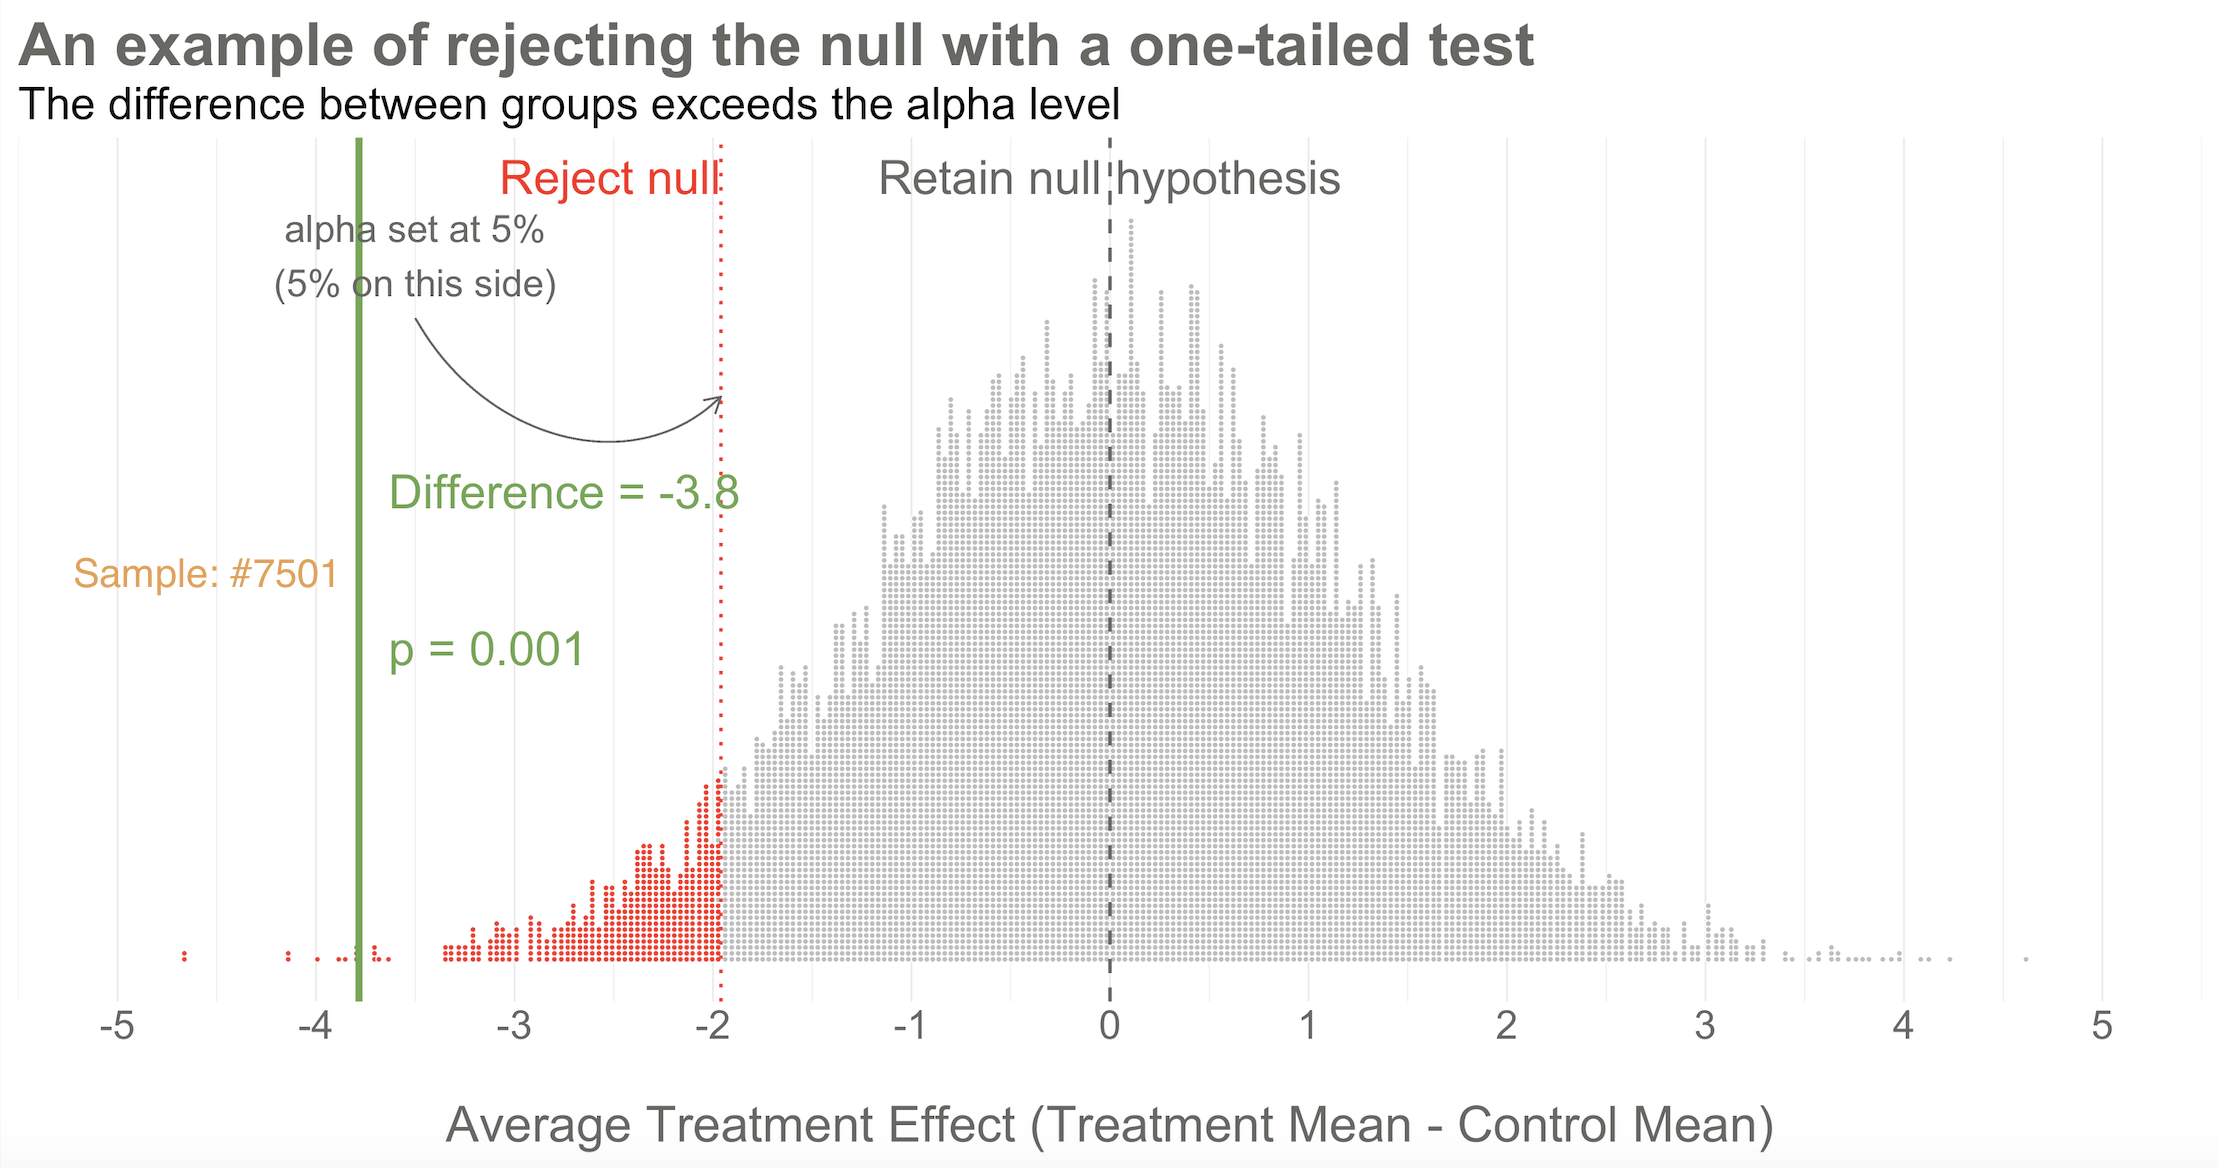 10,000 simulated results when there's no effect. Result of study #7501 falls outside of the goal post, so the null hypothesis is rejected.